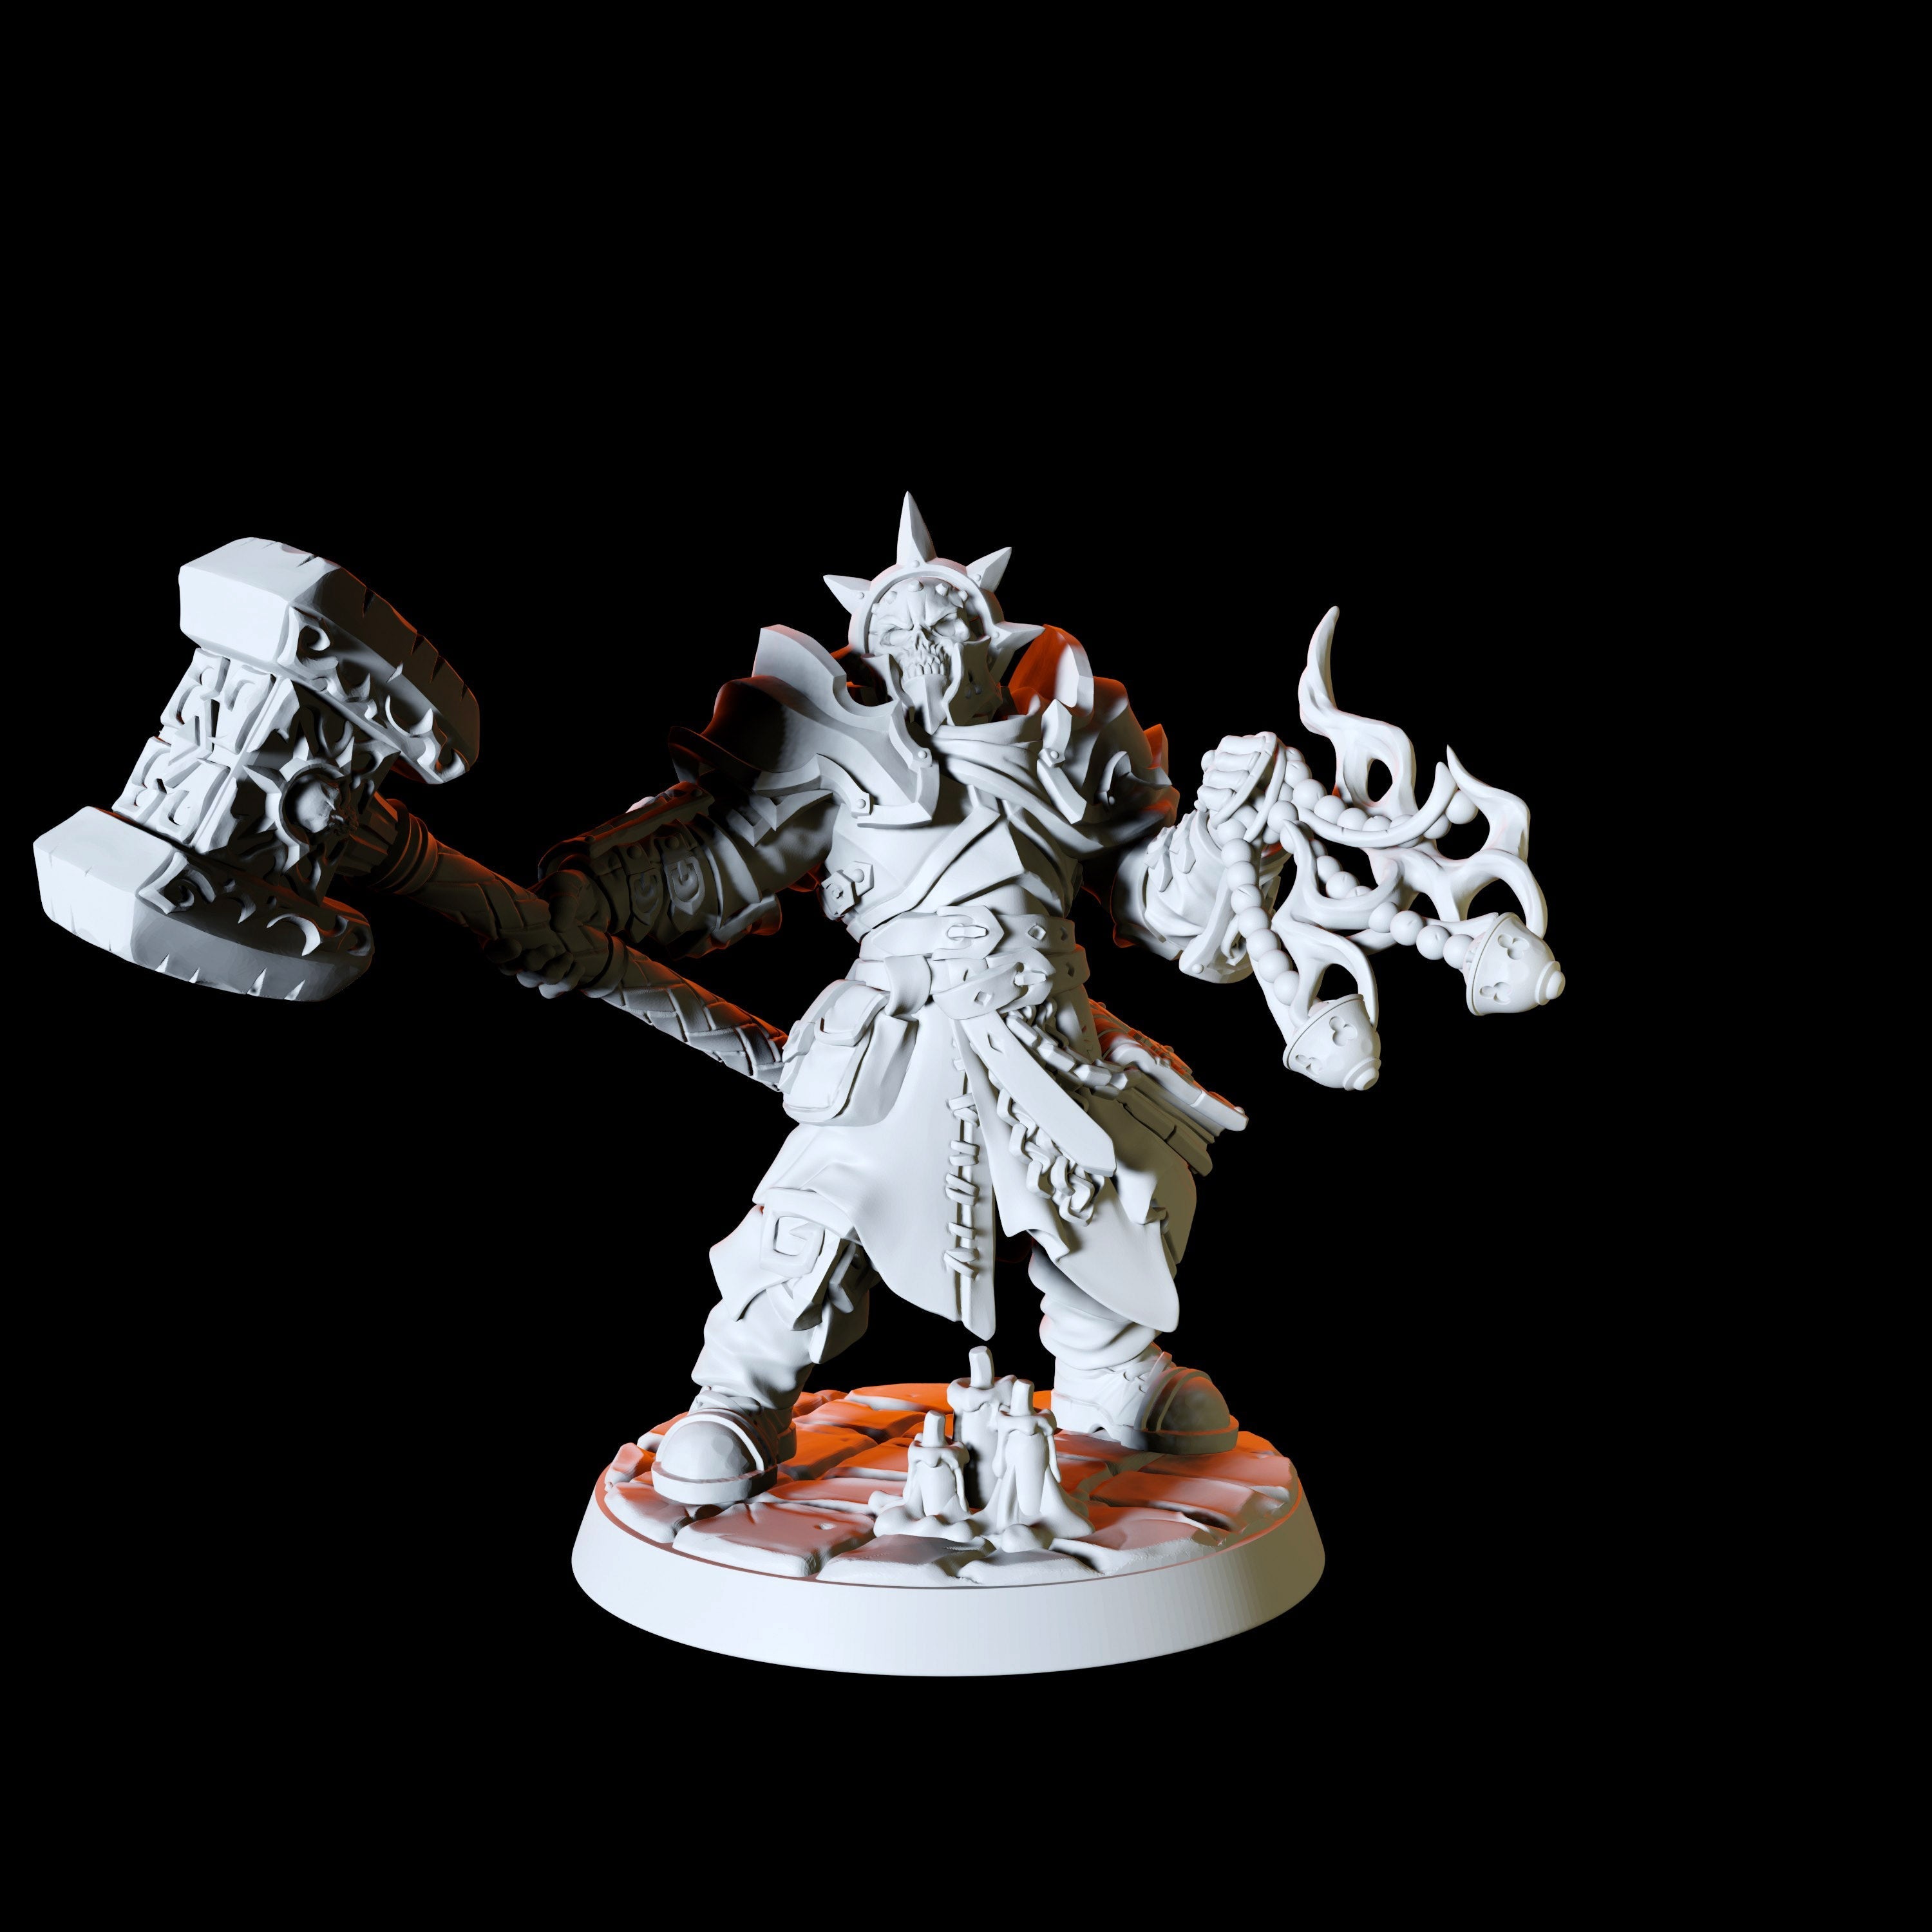 Six Human Paladin Miniatures for Dungeons and Dragons - Myth Forged